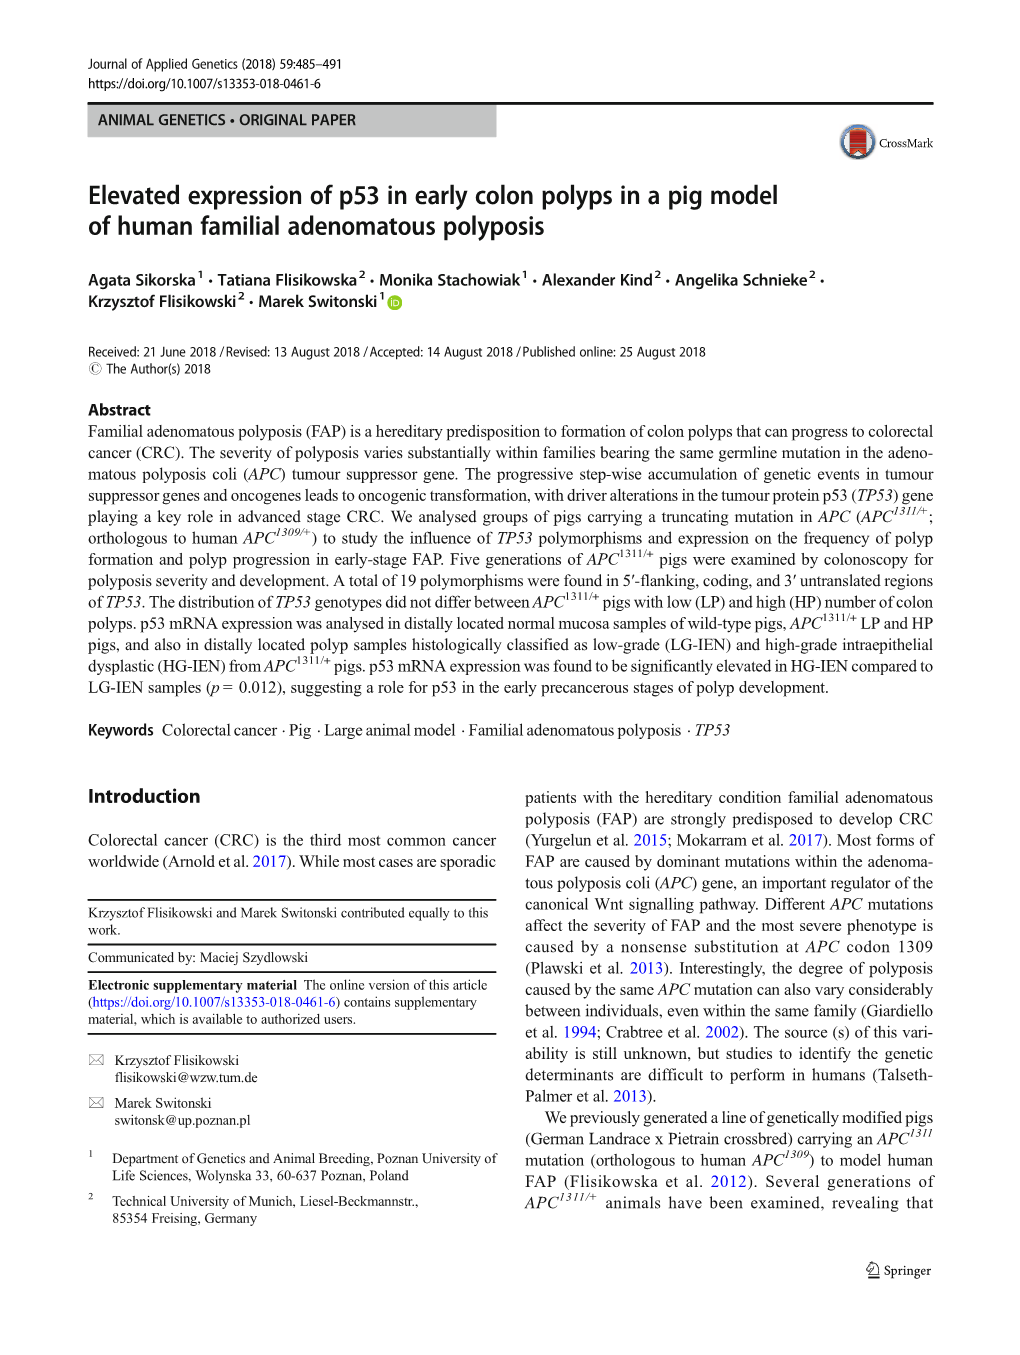 Elevated Expression of P53 in Early Colon Polyps in a Pig Model of Human Familial Adenomatous Polyposis